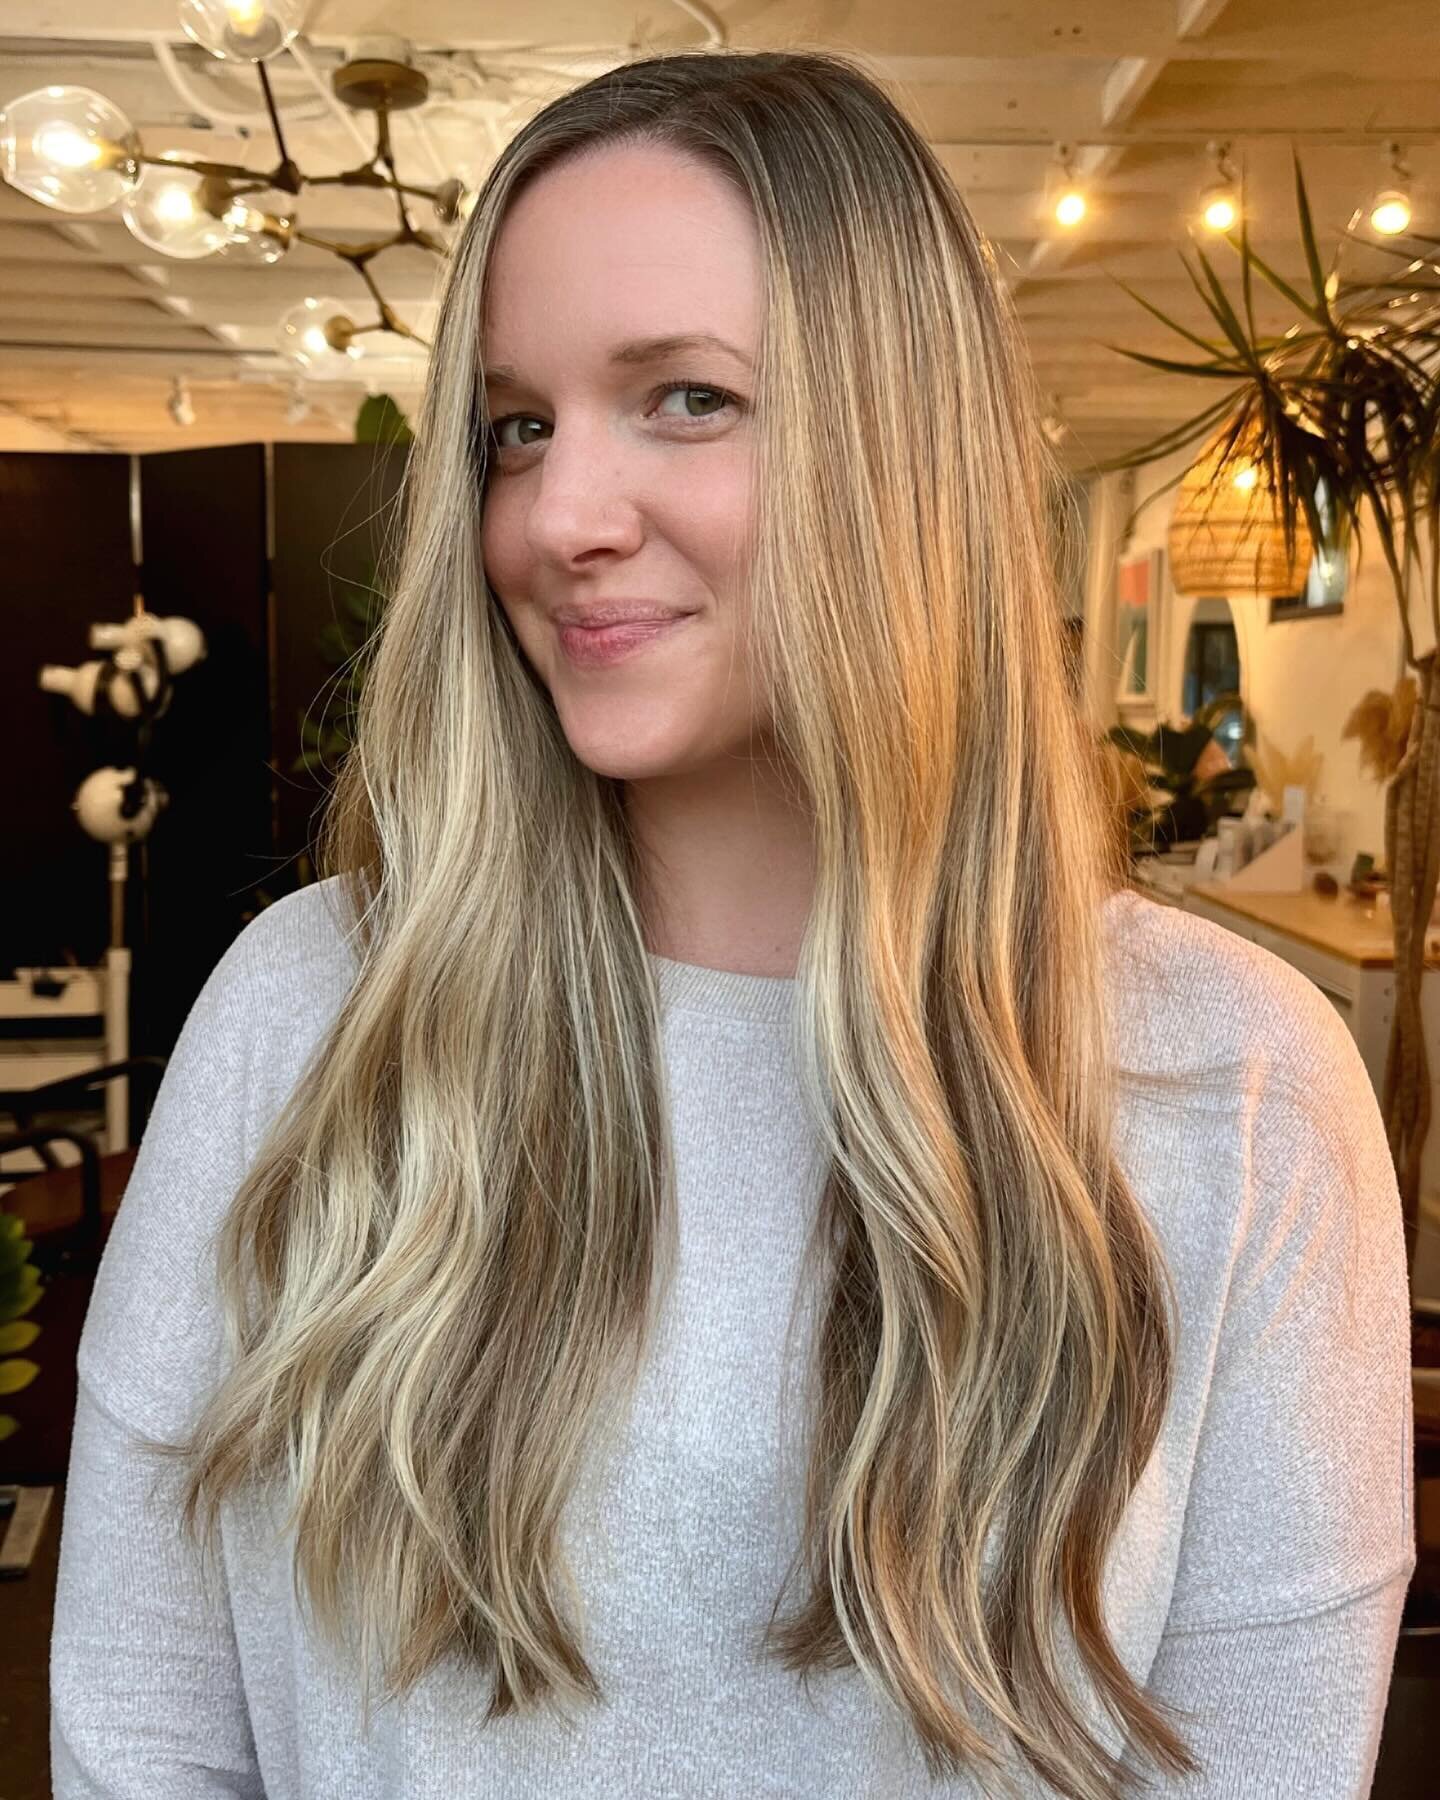 Made with love by KaLeigh 🖤

#atxhairstylist 
#plumepretty 
#atxblondes